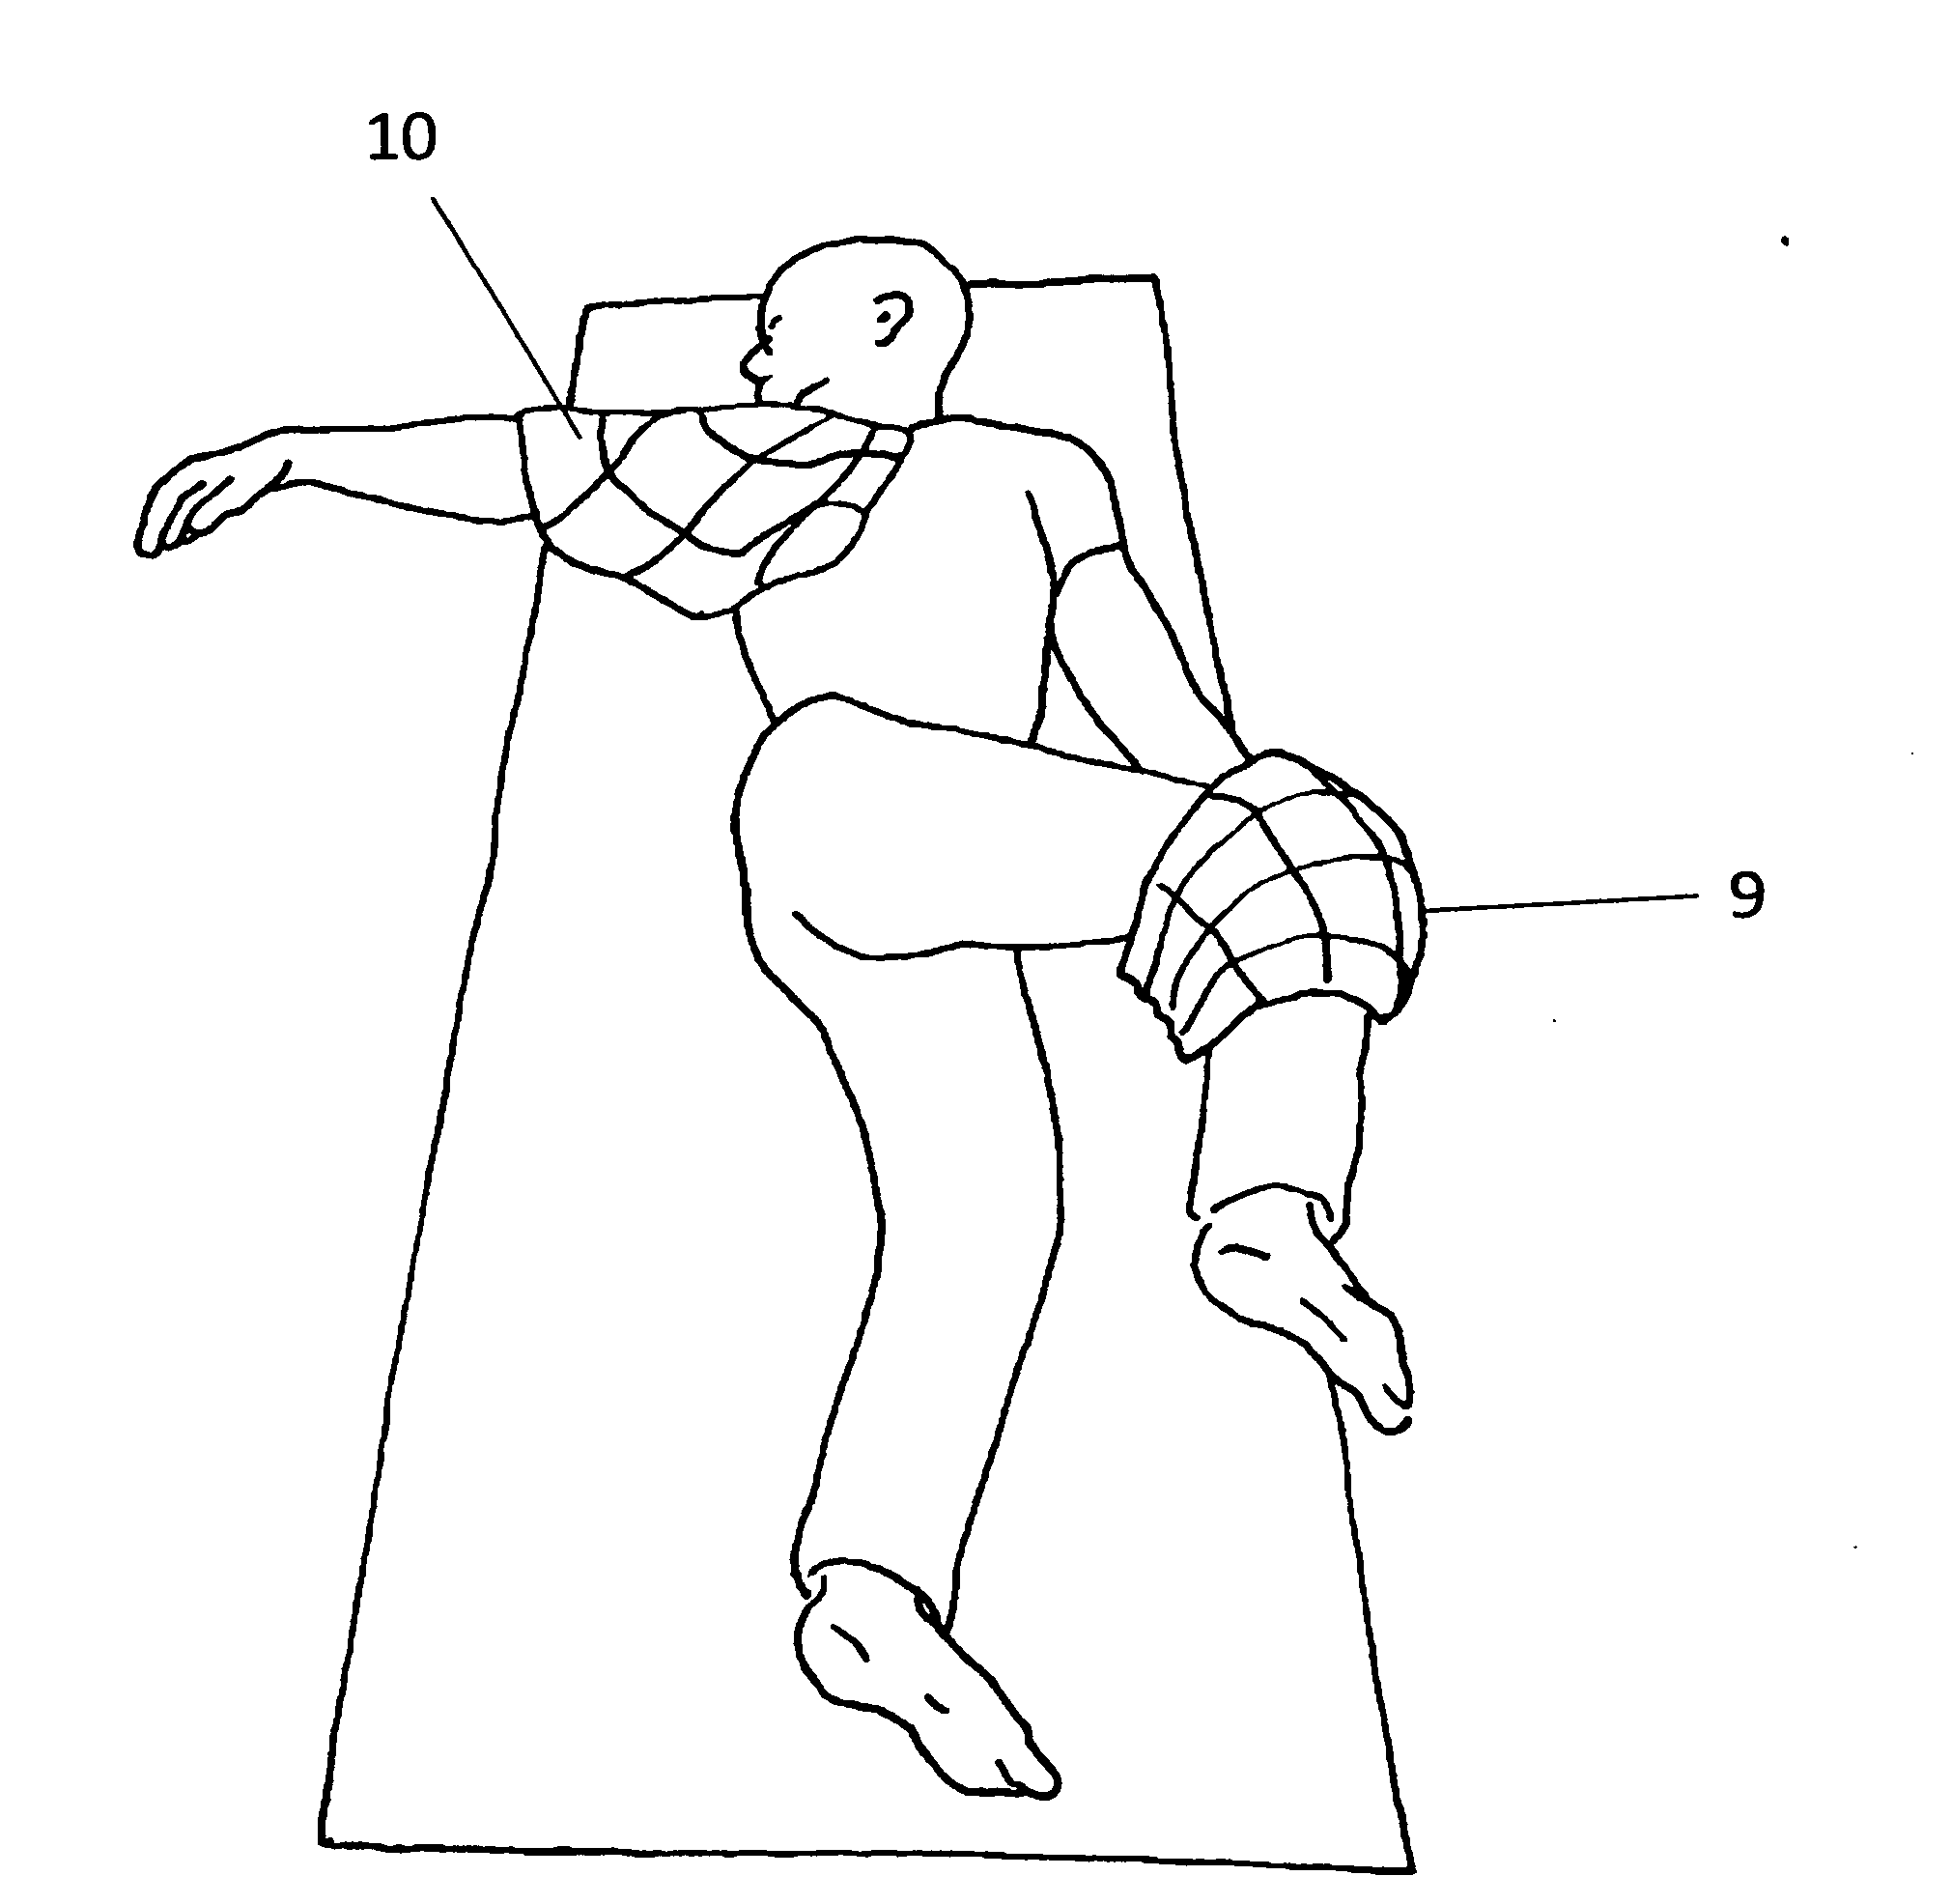 Weighted Device